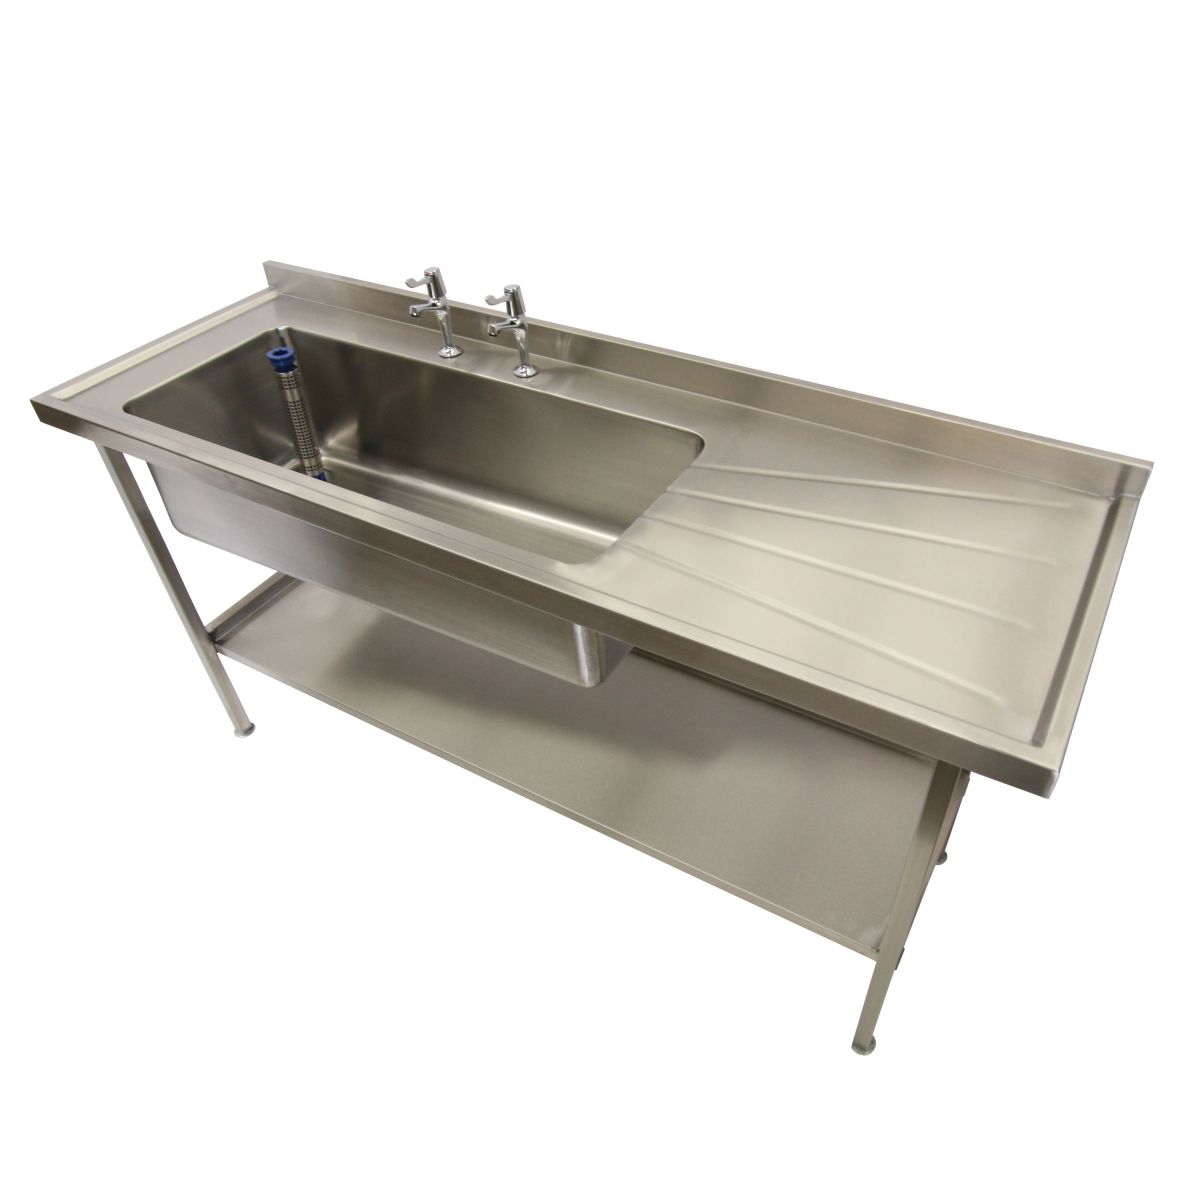 Product C A Catering Sink 851 2 